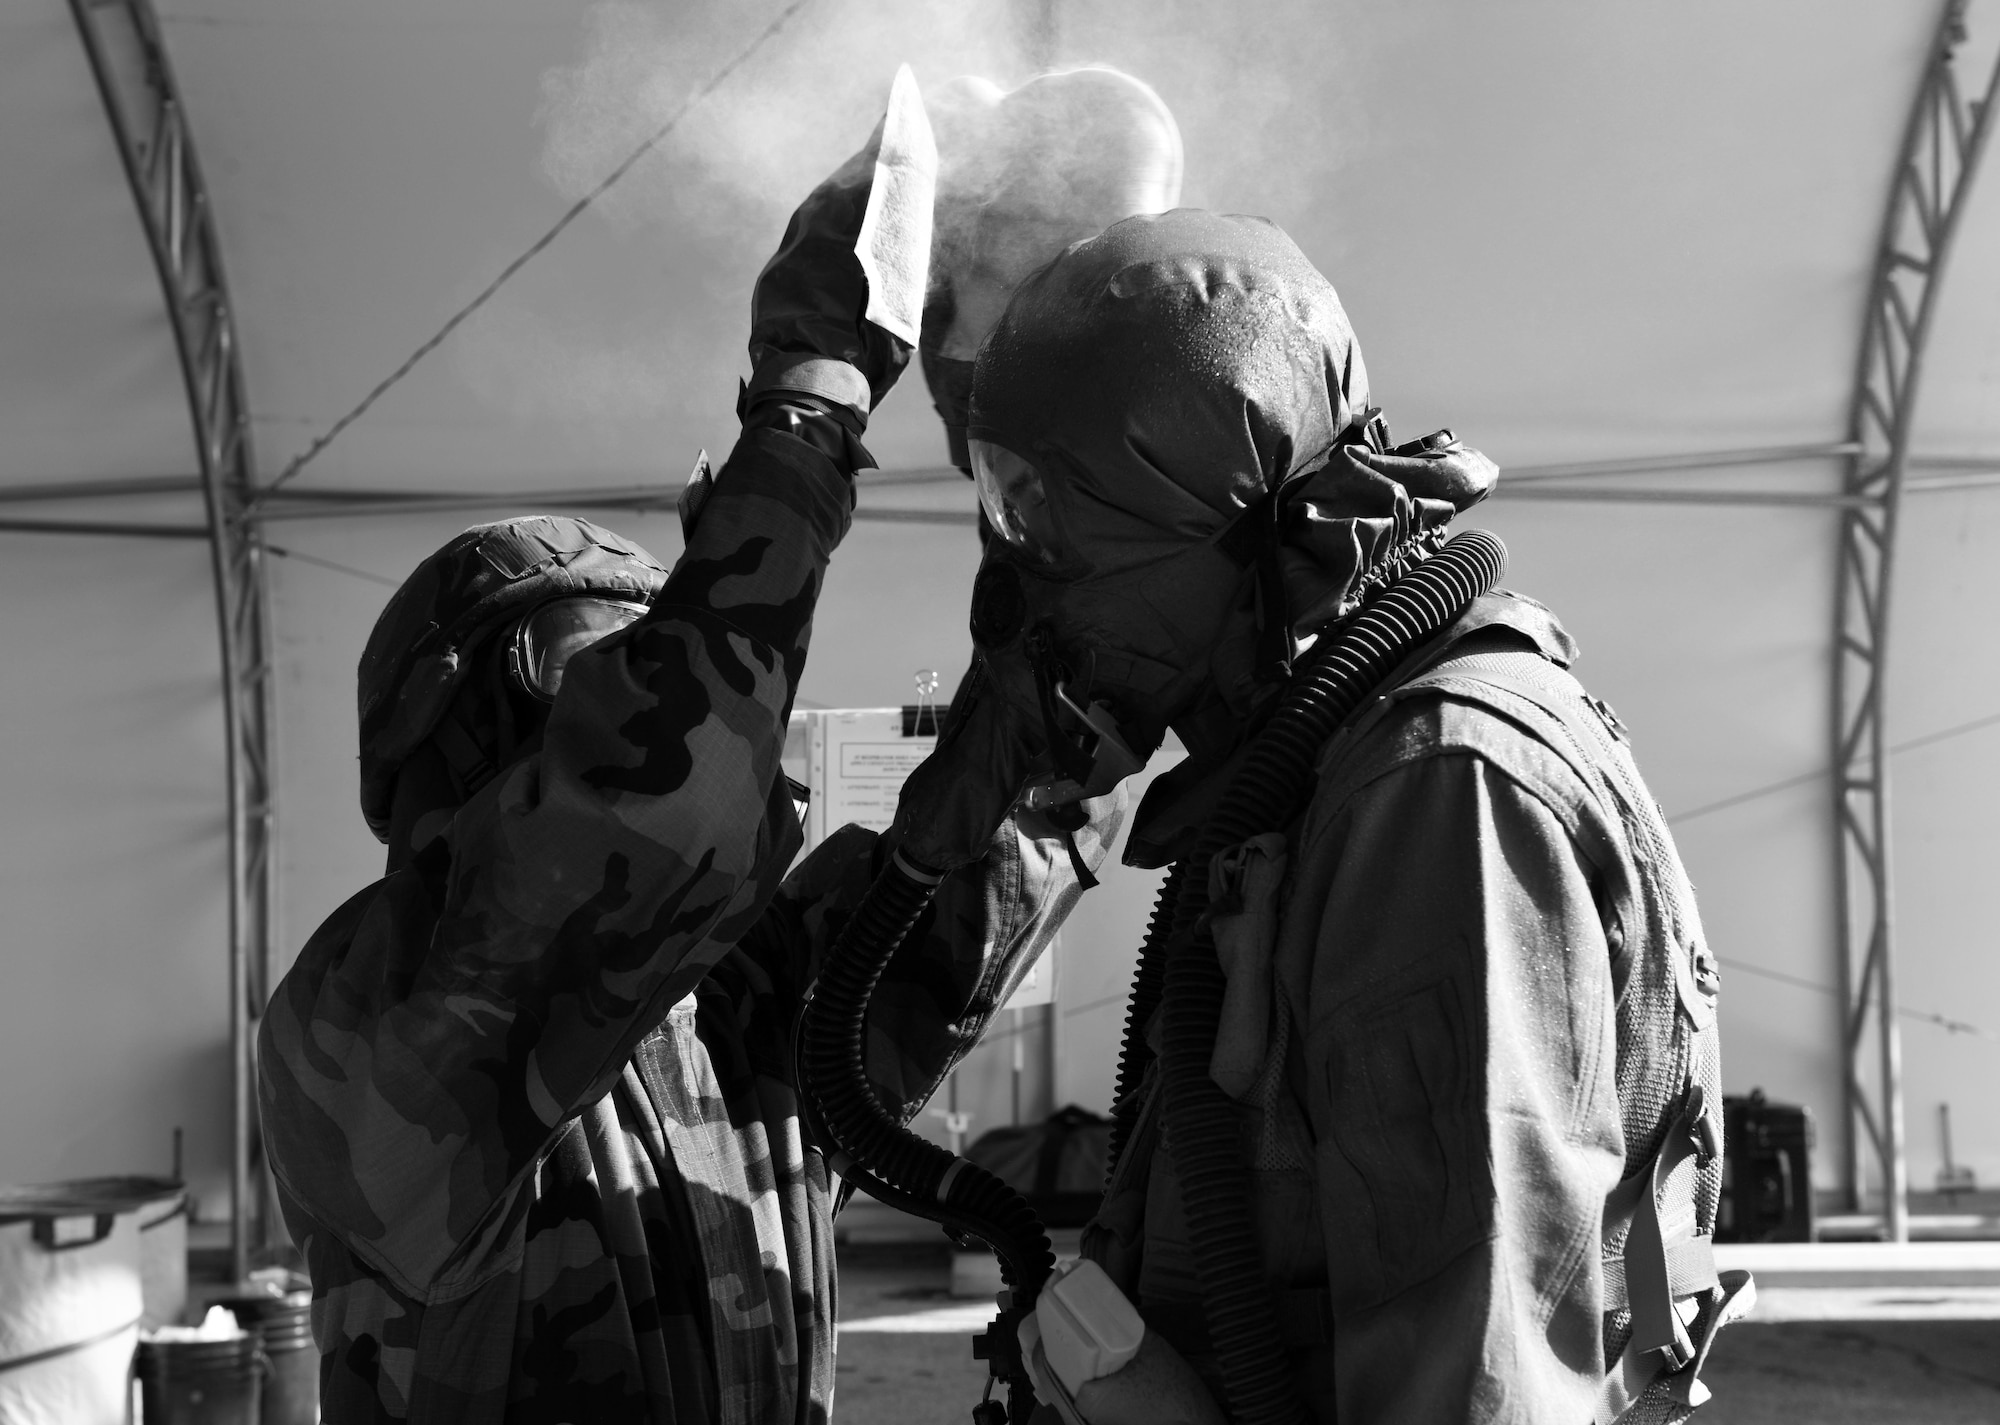 An aircrew flight equipment Airman uses M295 mitts to simulate removing contamination from an aircrew member during the Aircrew Contamination Control Area process as part of exercise Toxic Arch on at Scott Air Force Base, Ill., July 19. The M295 mitts are used to transfer as much charcoal to the aircrew member and equipment as possible. (U.S. Air Force photo by Tech. Sgt. Terri Paden)

